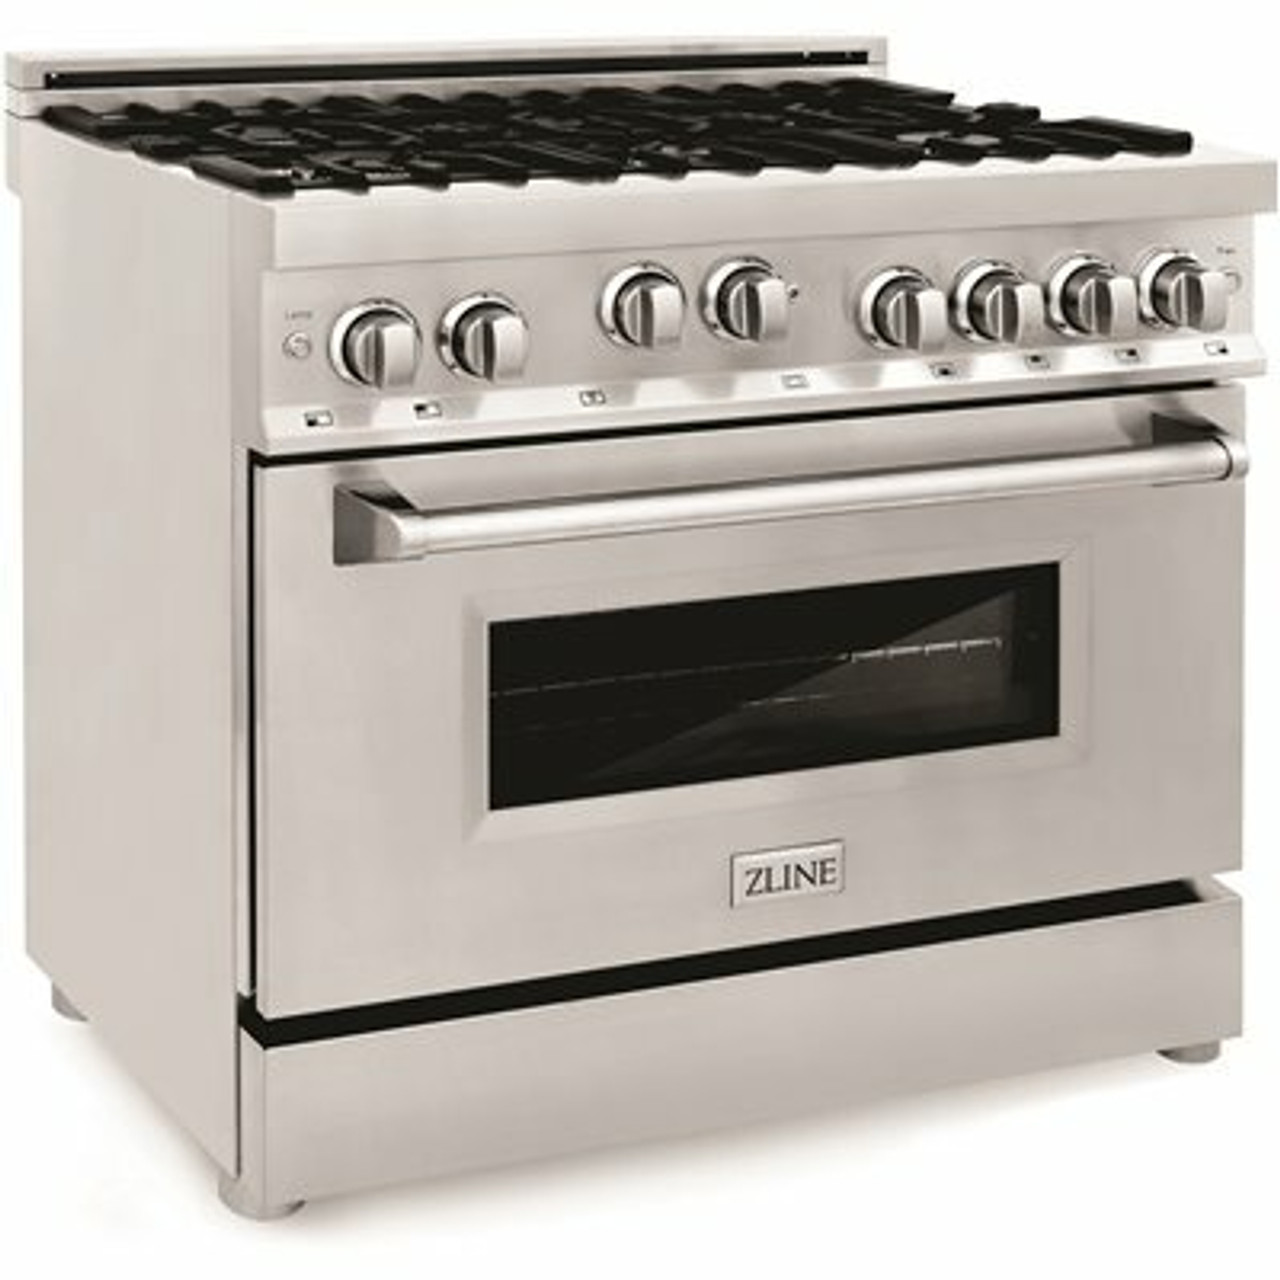 Zline Kitchen And Bath 36 In. 4.6 Cu. Ft. Gas Range With Convection Gas Oven In Stainless Steel